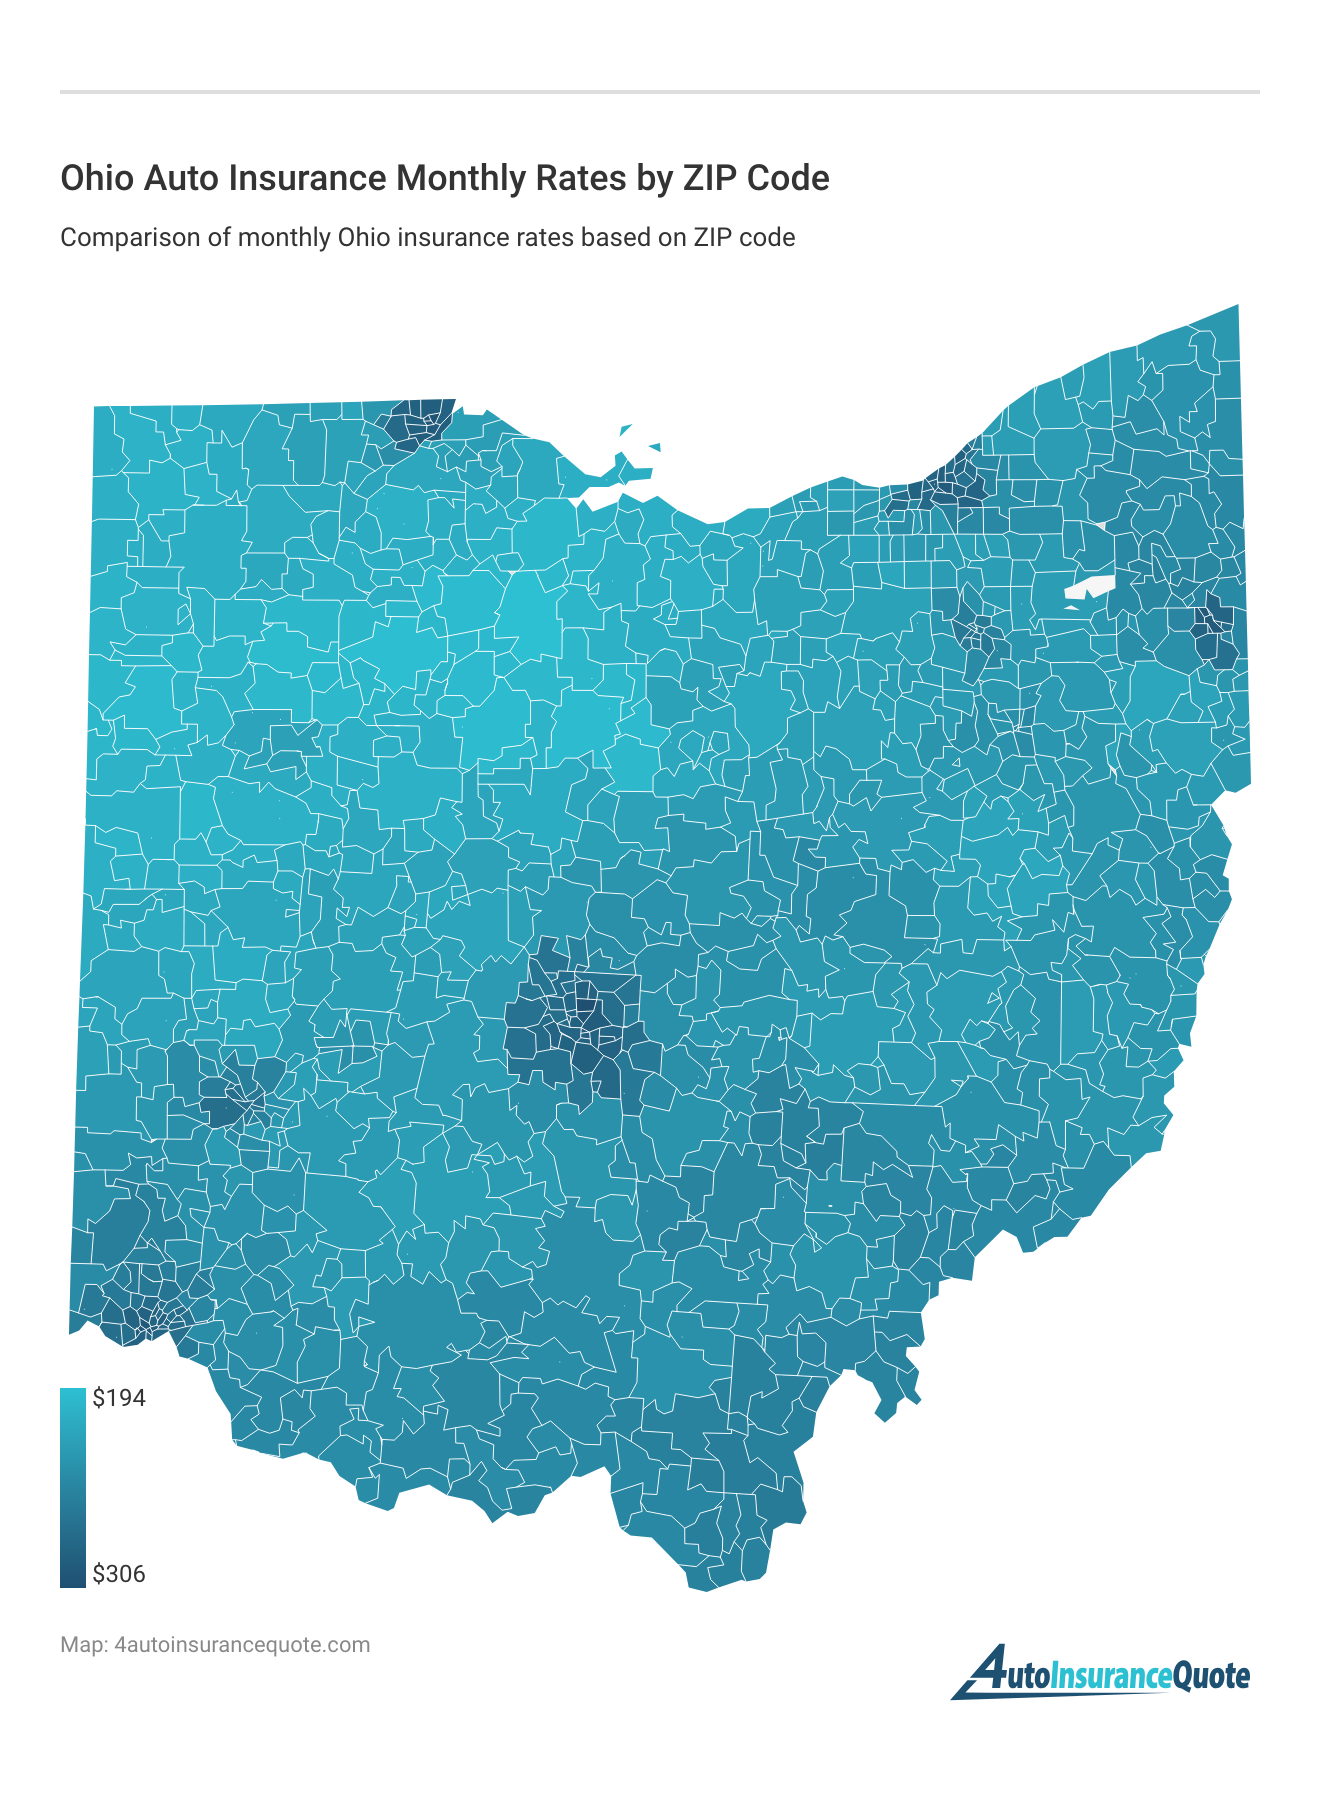 <h3>Ohio Auto Insurance Monthly Rates by ZIP Code</h3>